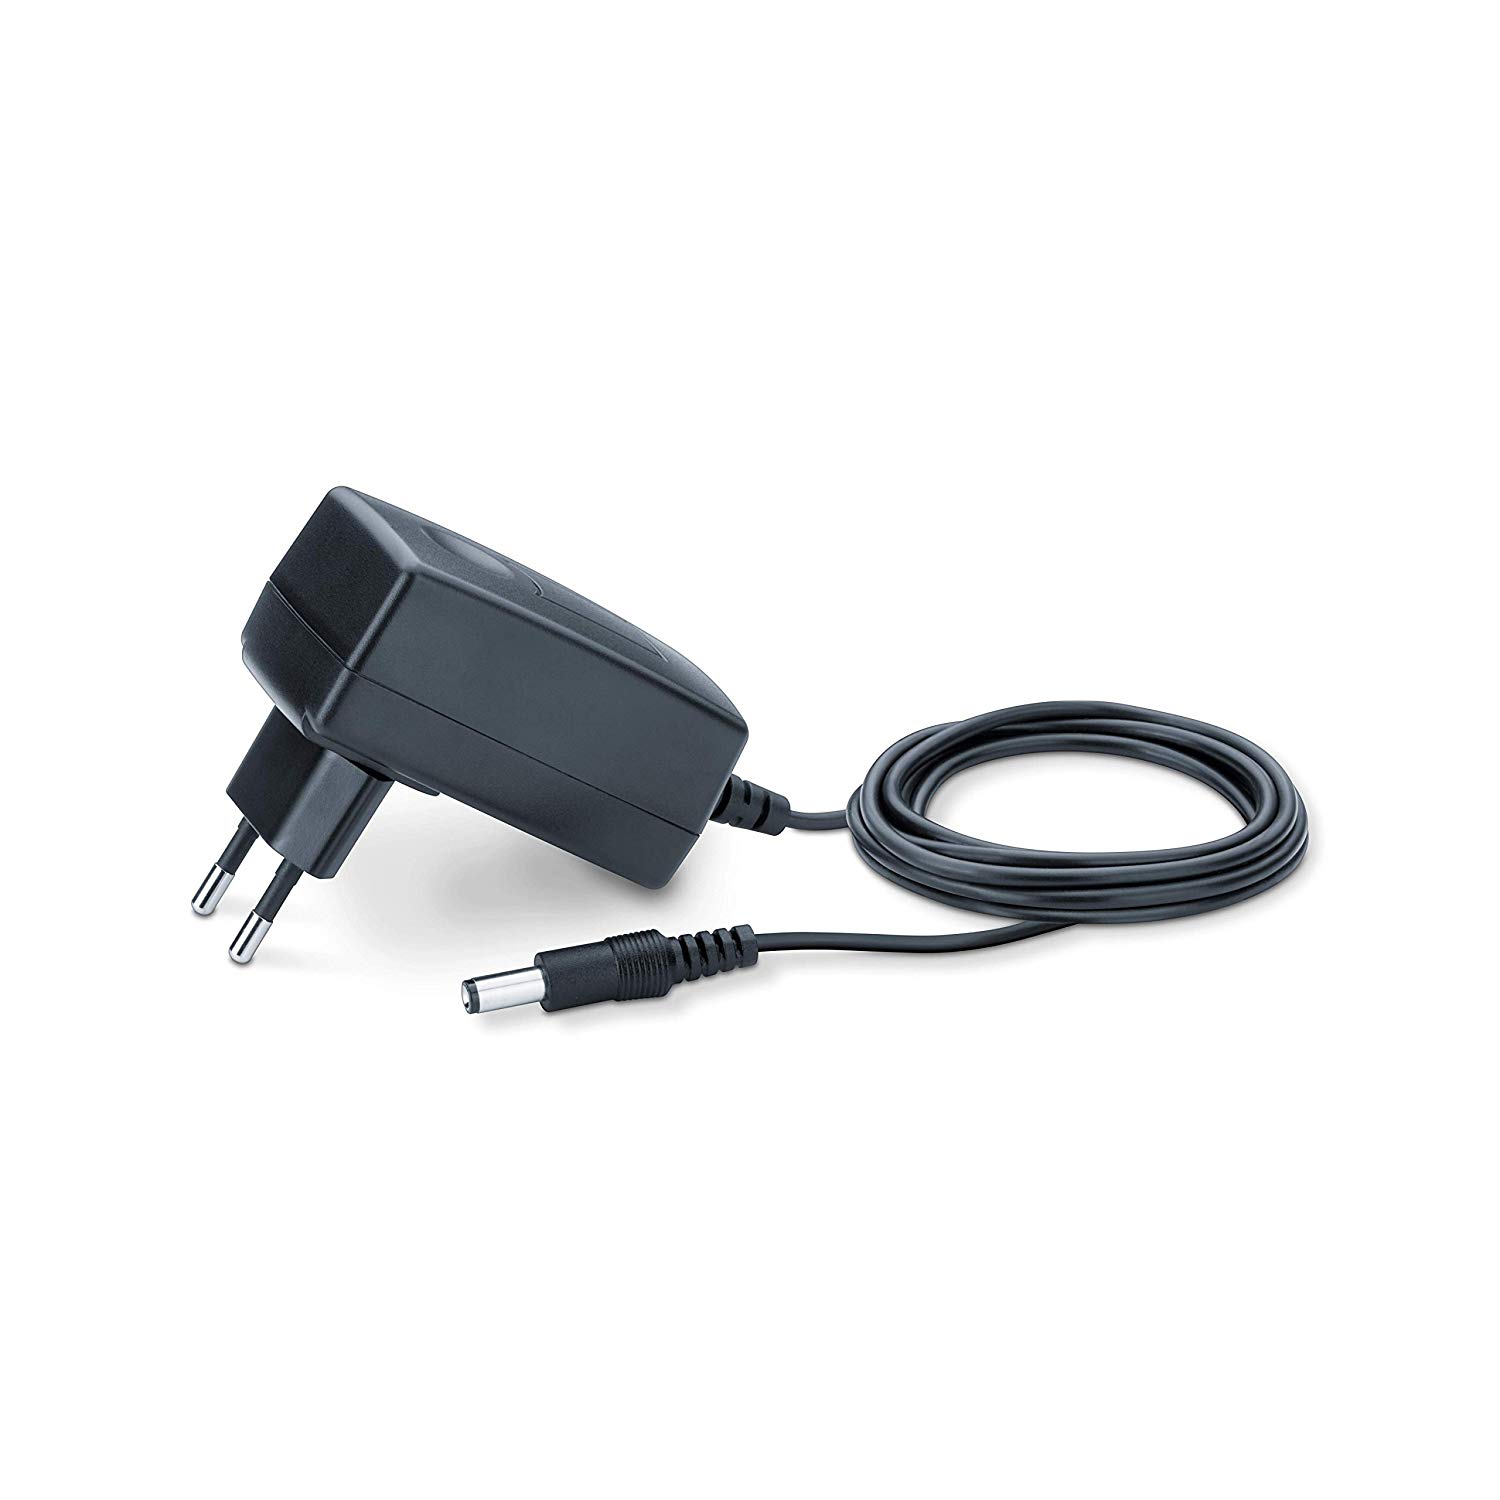 Medela Power Adapter for Swing Maxi and Freestyle 990271 (Spanish Version)